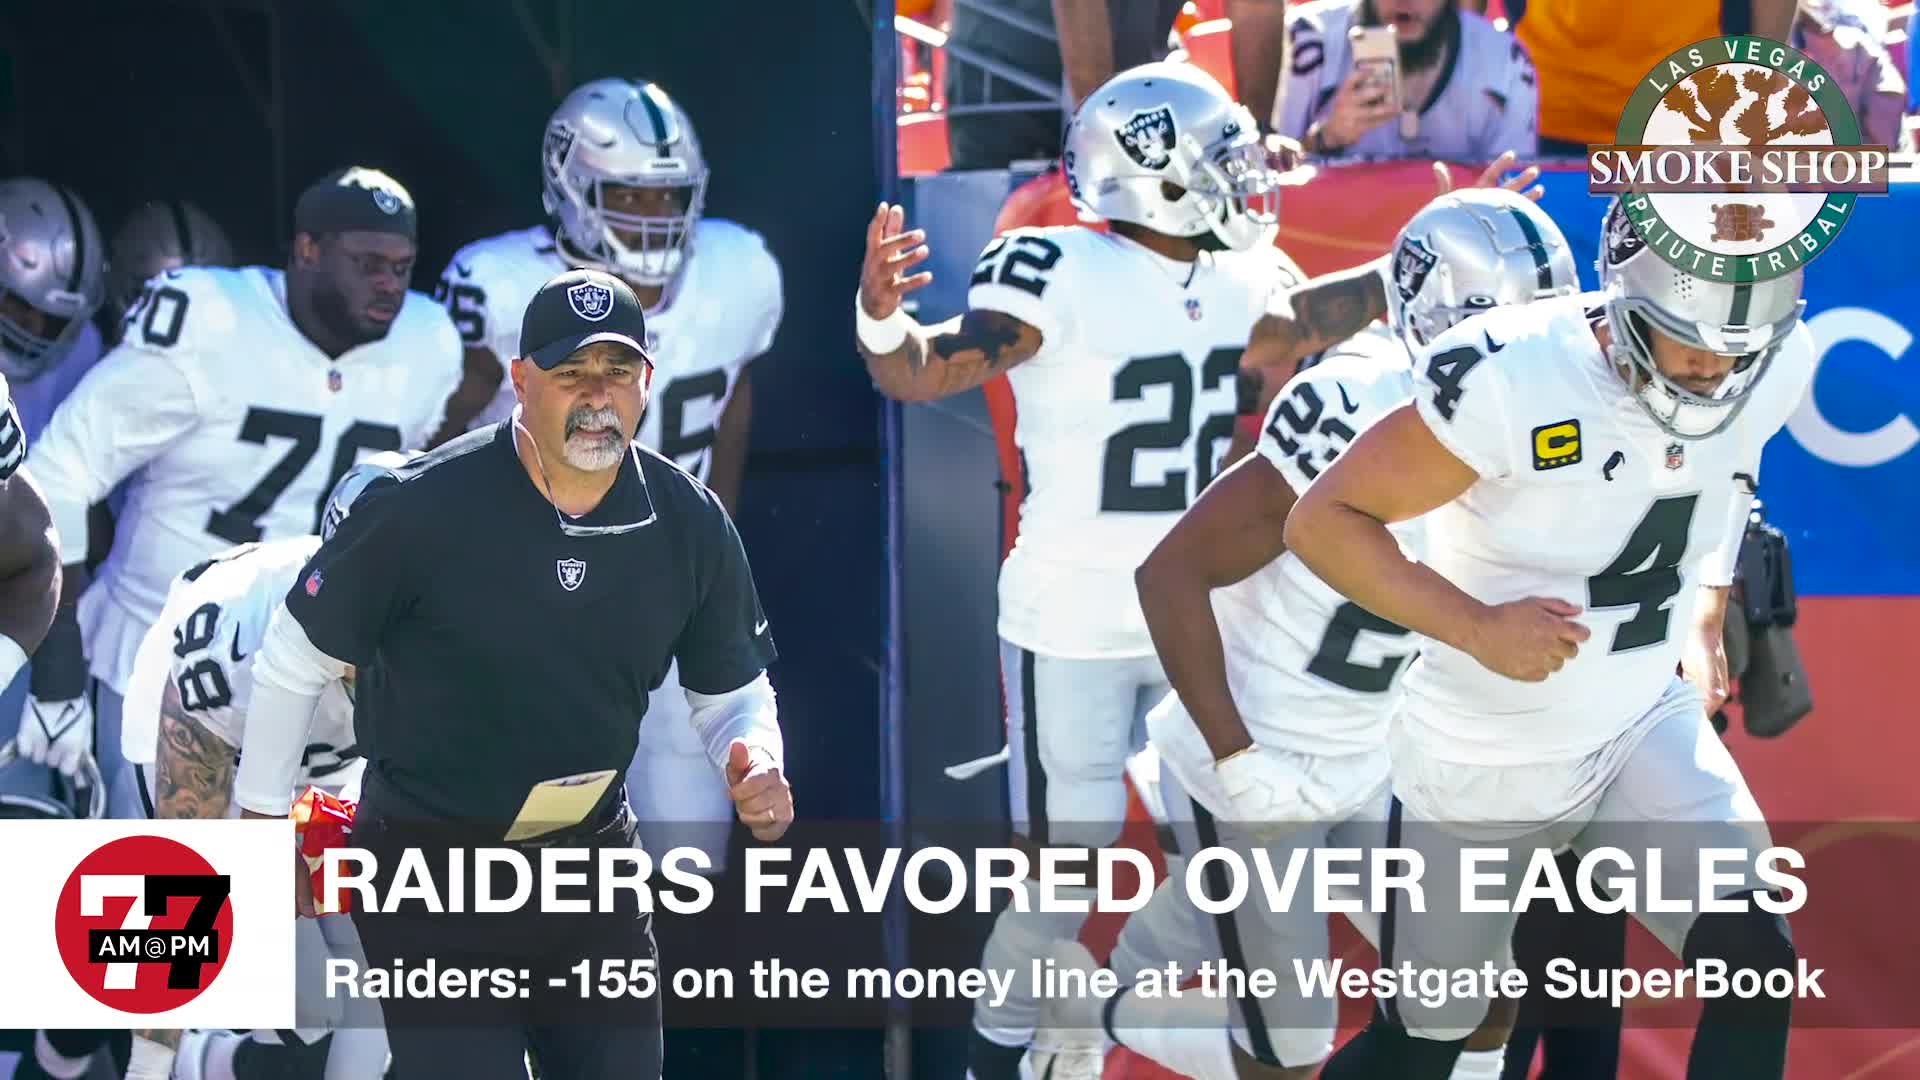 7@7PM Raiders Favored Over Eagles